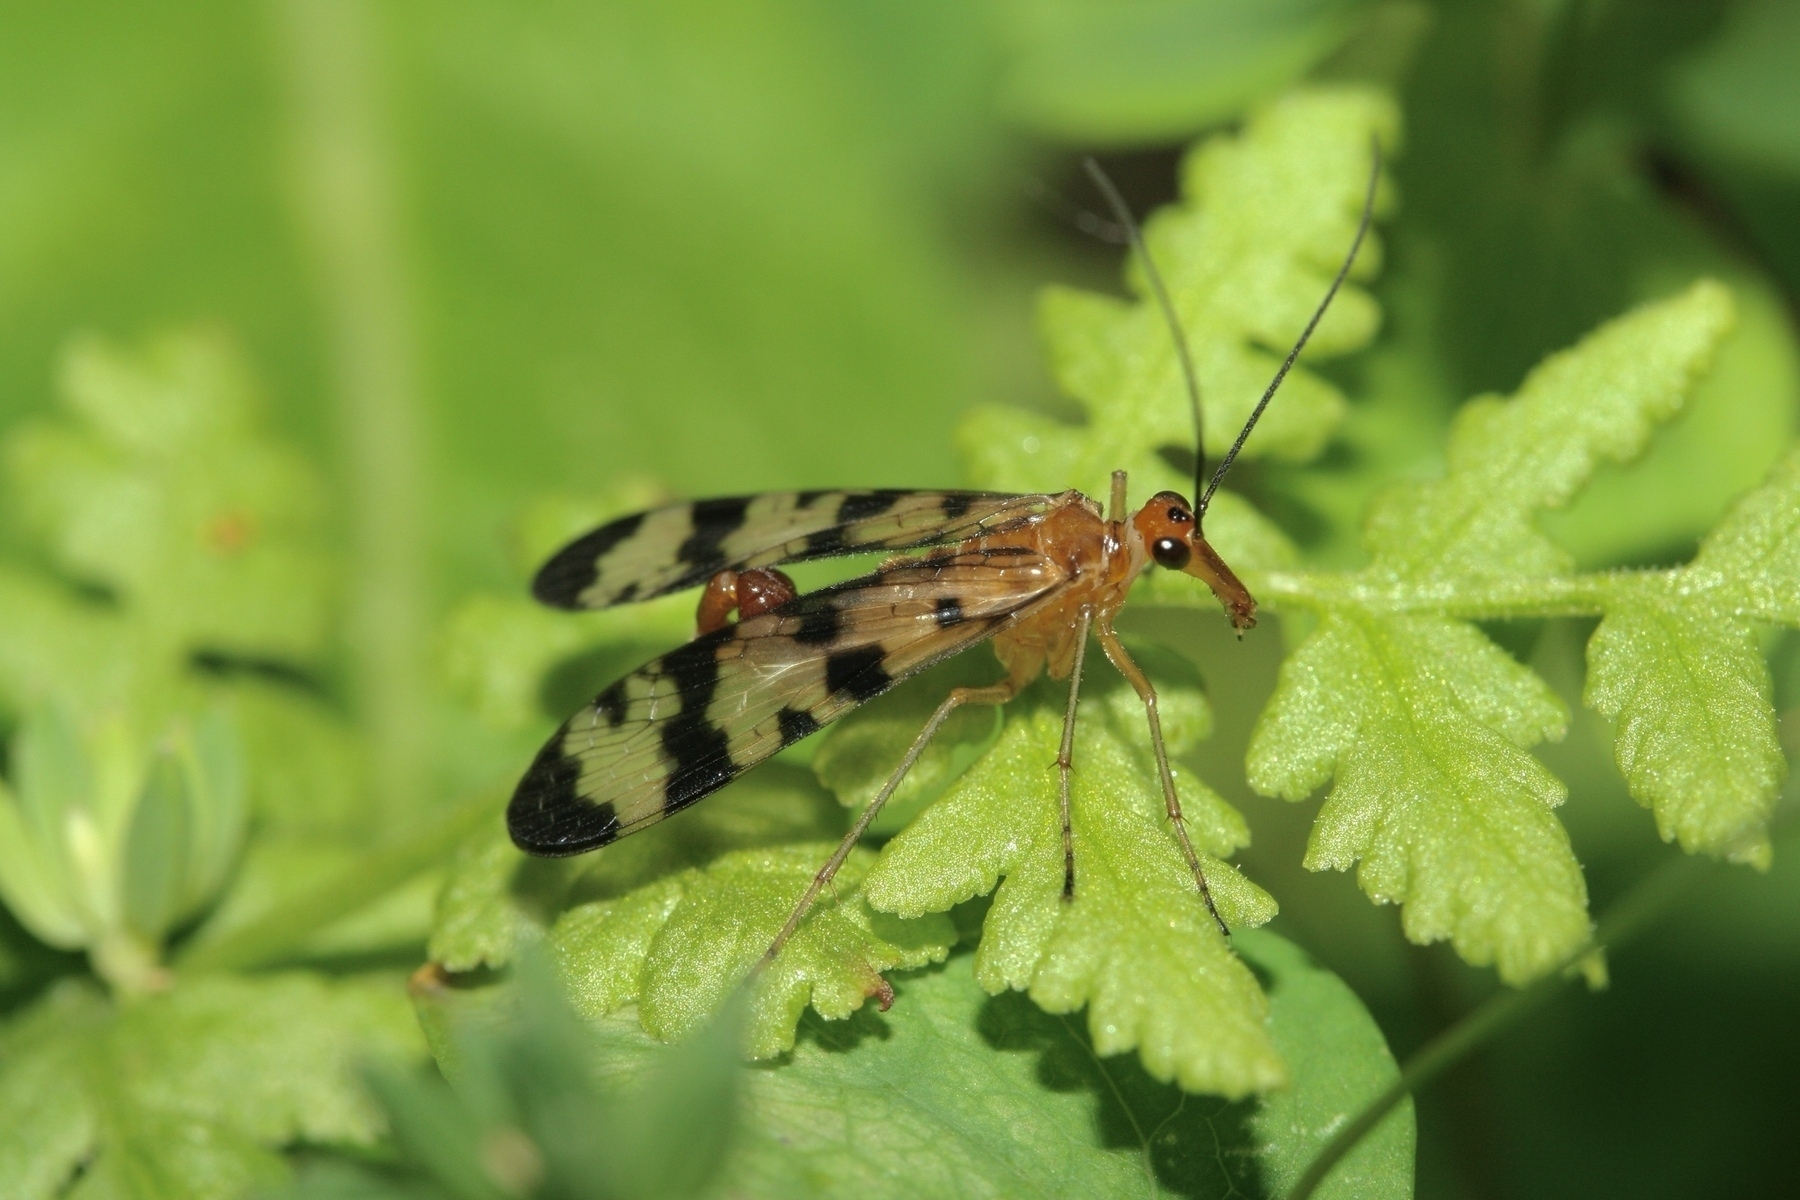 A winged insect is perched on a leaf. It's long with clear wings with several black bands. Its body is primarily orange and it has an elongated snout, black eyes. It almost seems friendly.